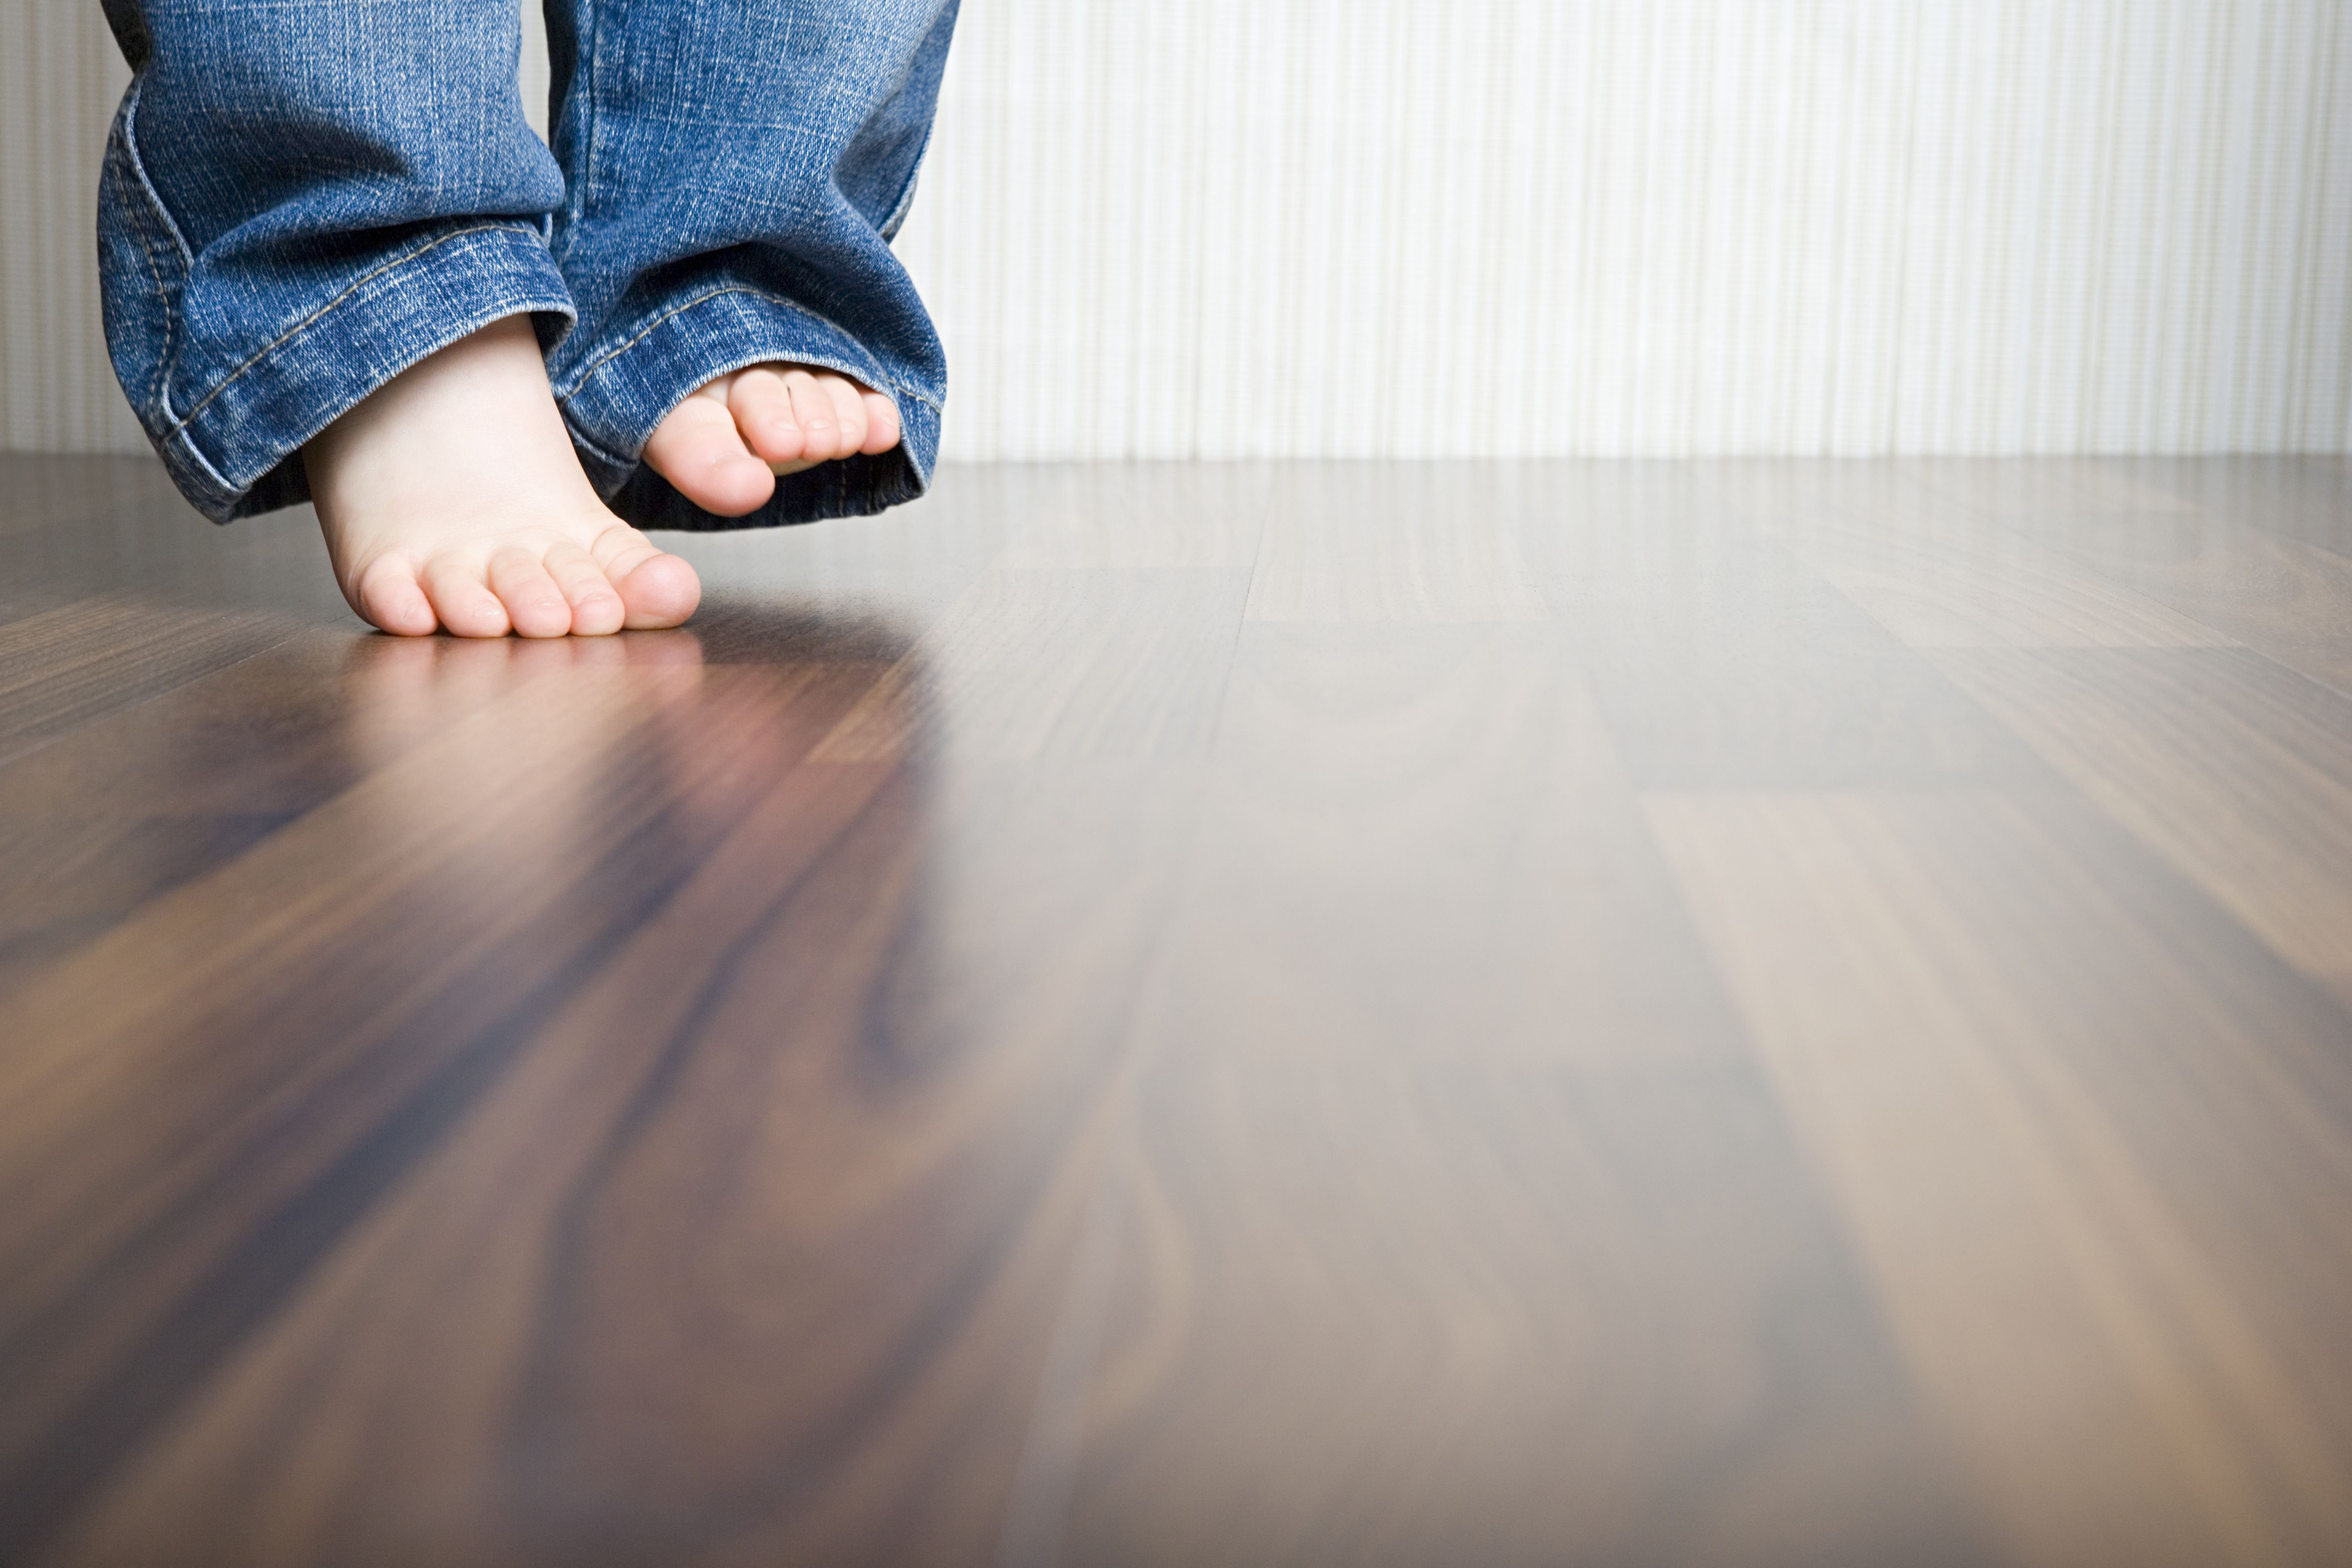 hardwood floor care kit of how to clean hardwood floors best way to clean wood flooring within 1512149908 gettyimages 75403973